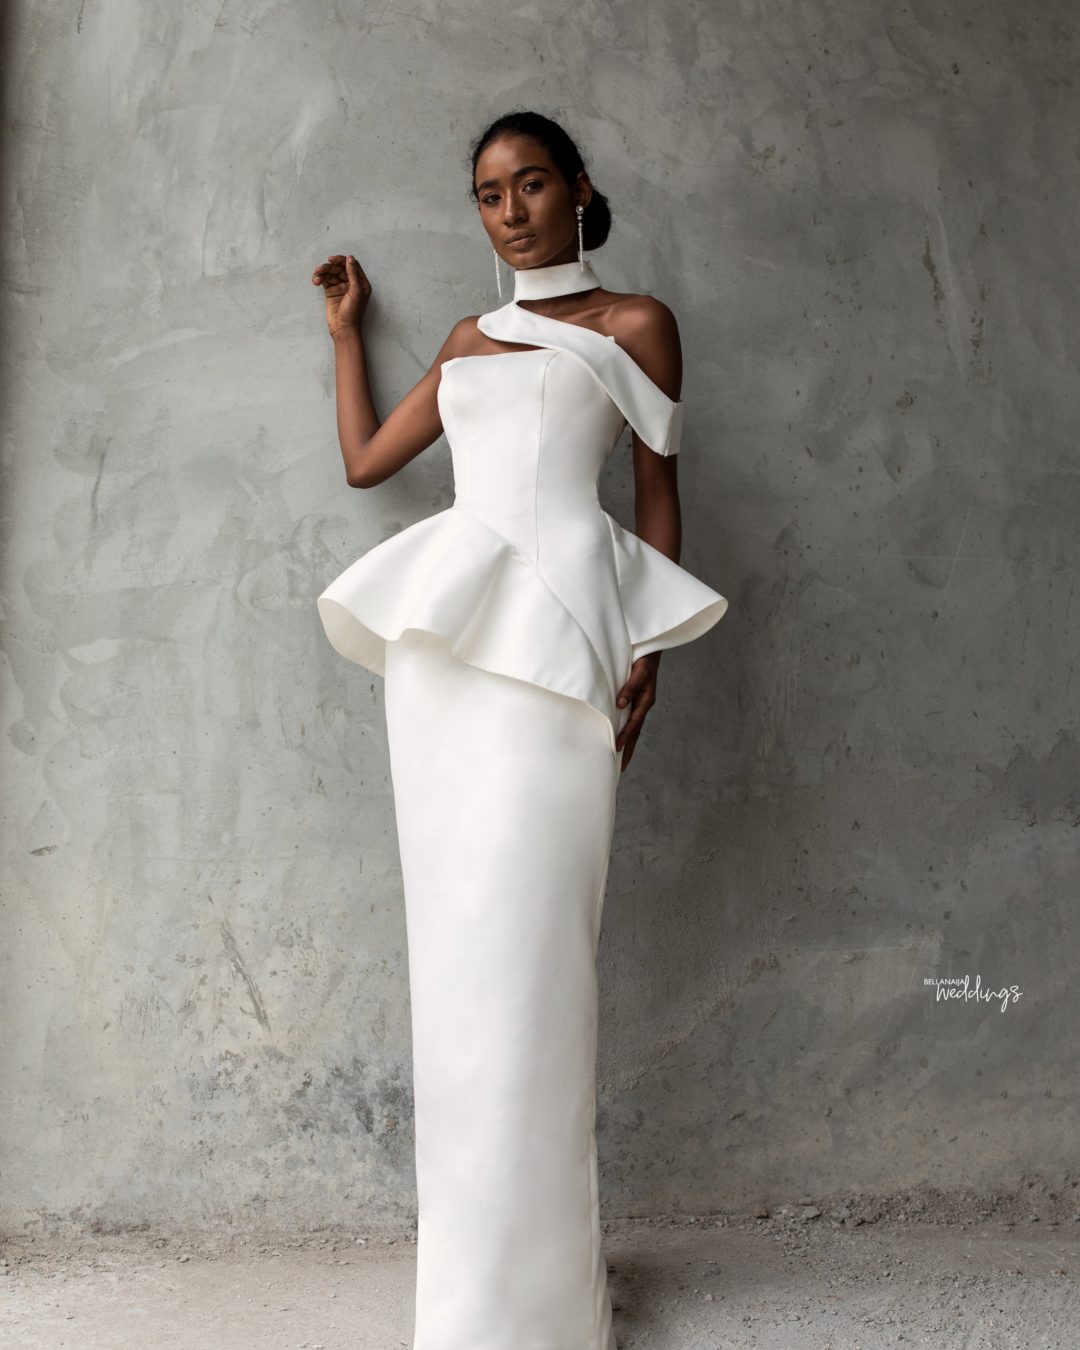 We Can't Help but Love This Andrea Iyamah Bridal Collection